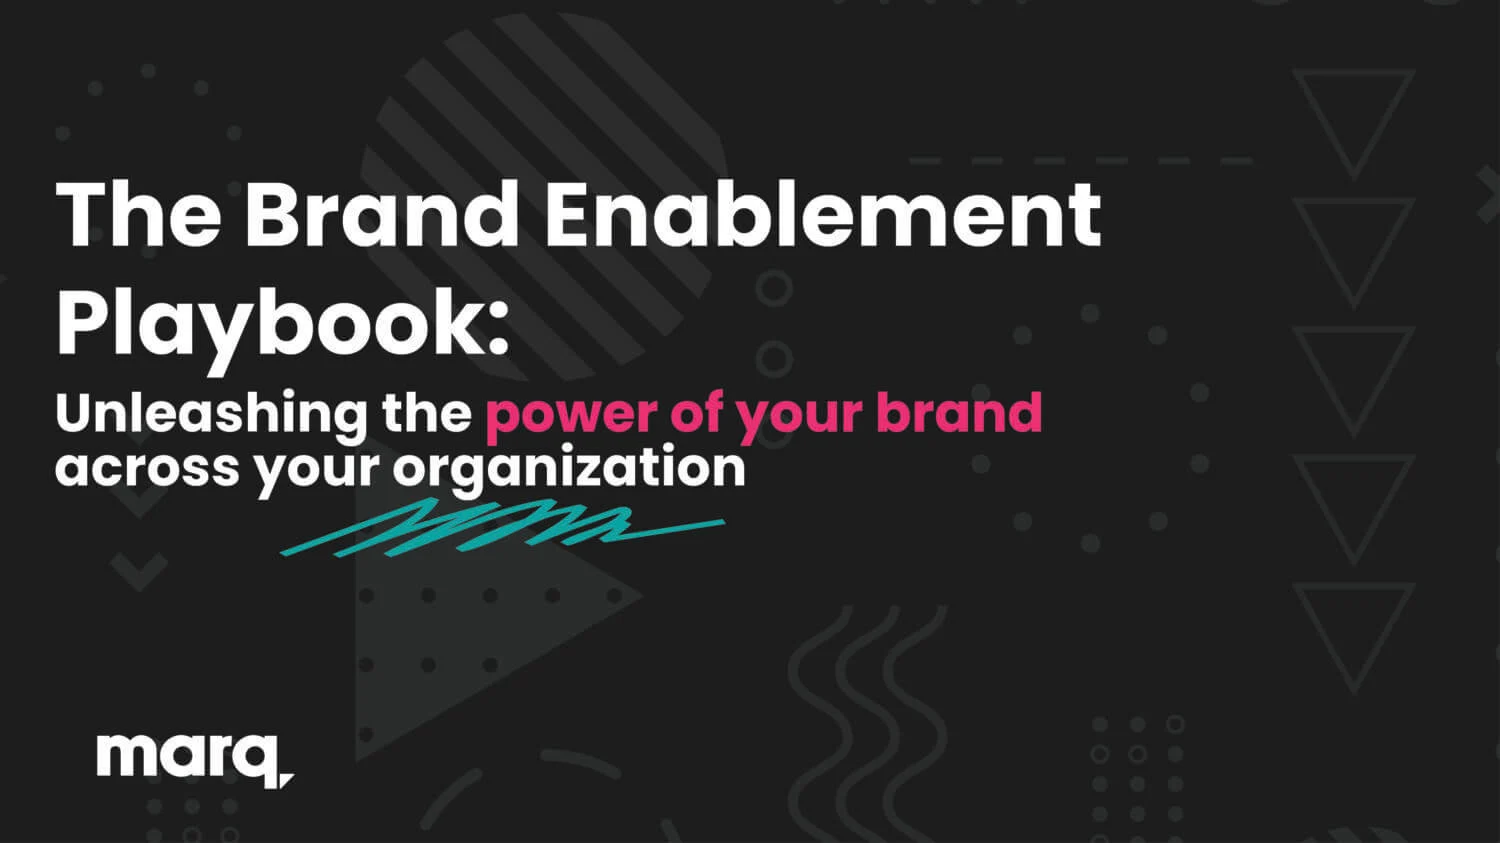 The Brand Enablement Playbook